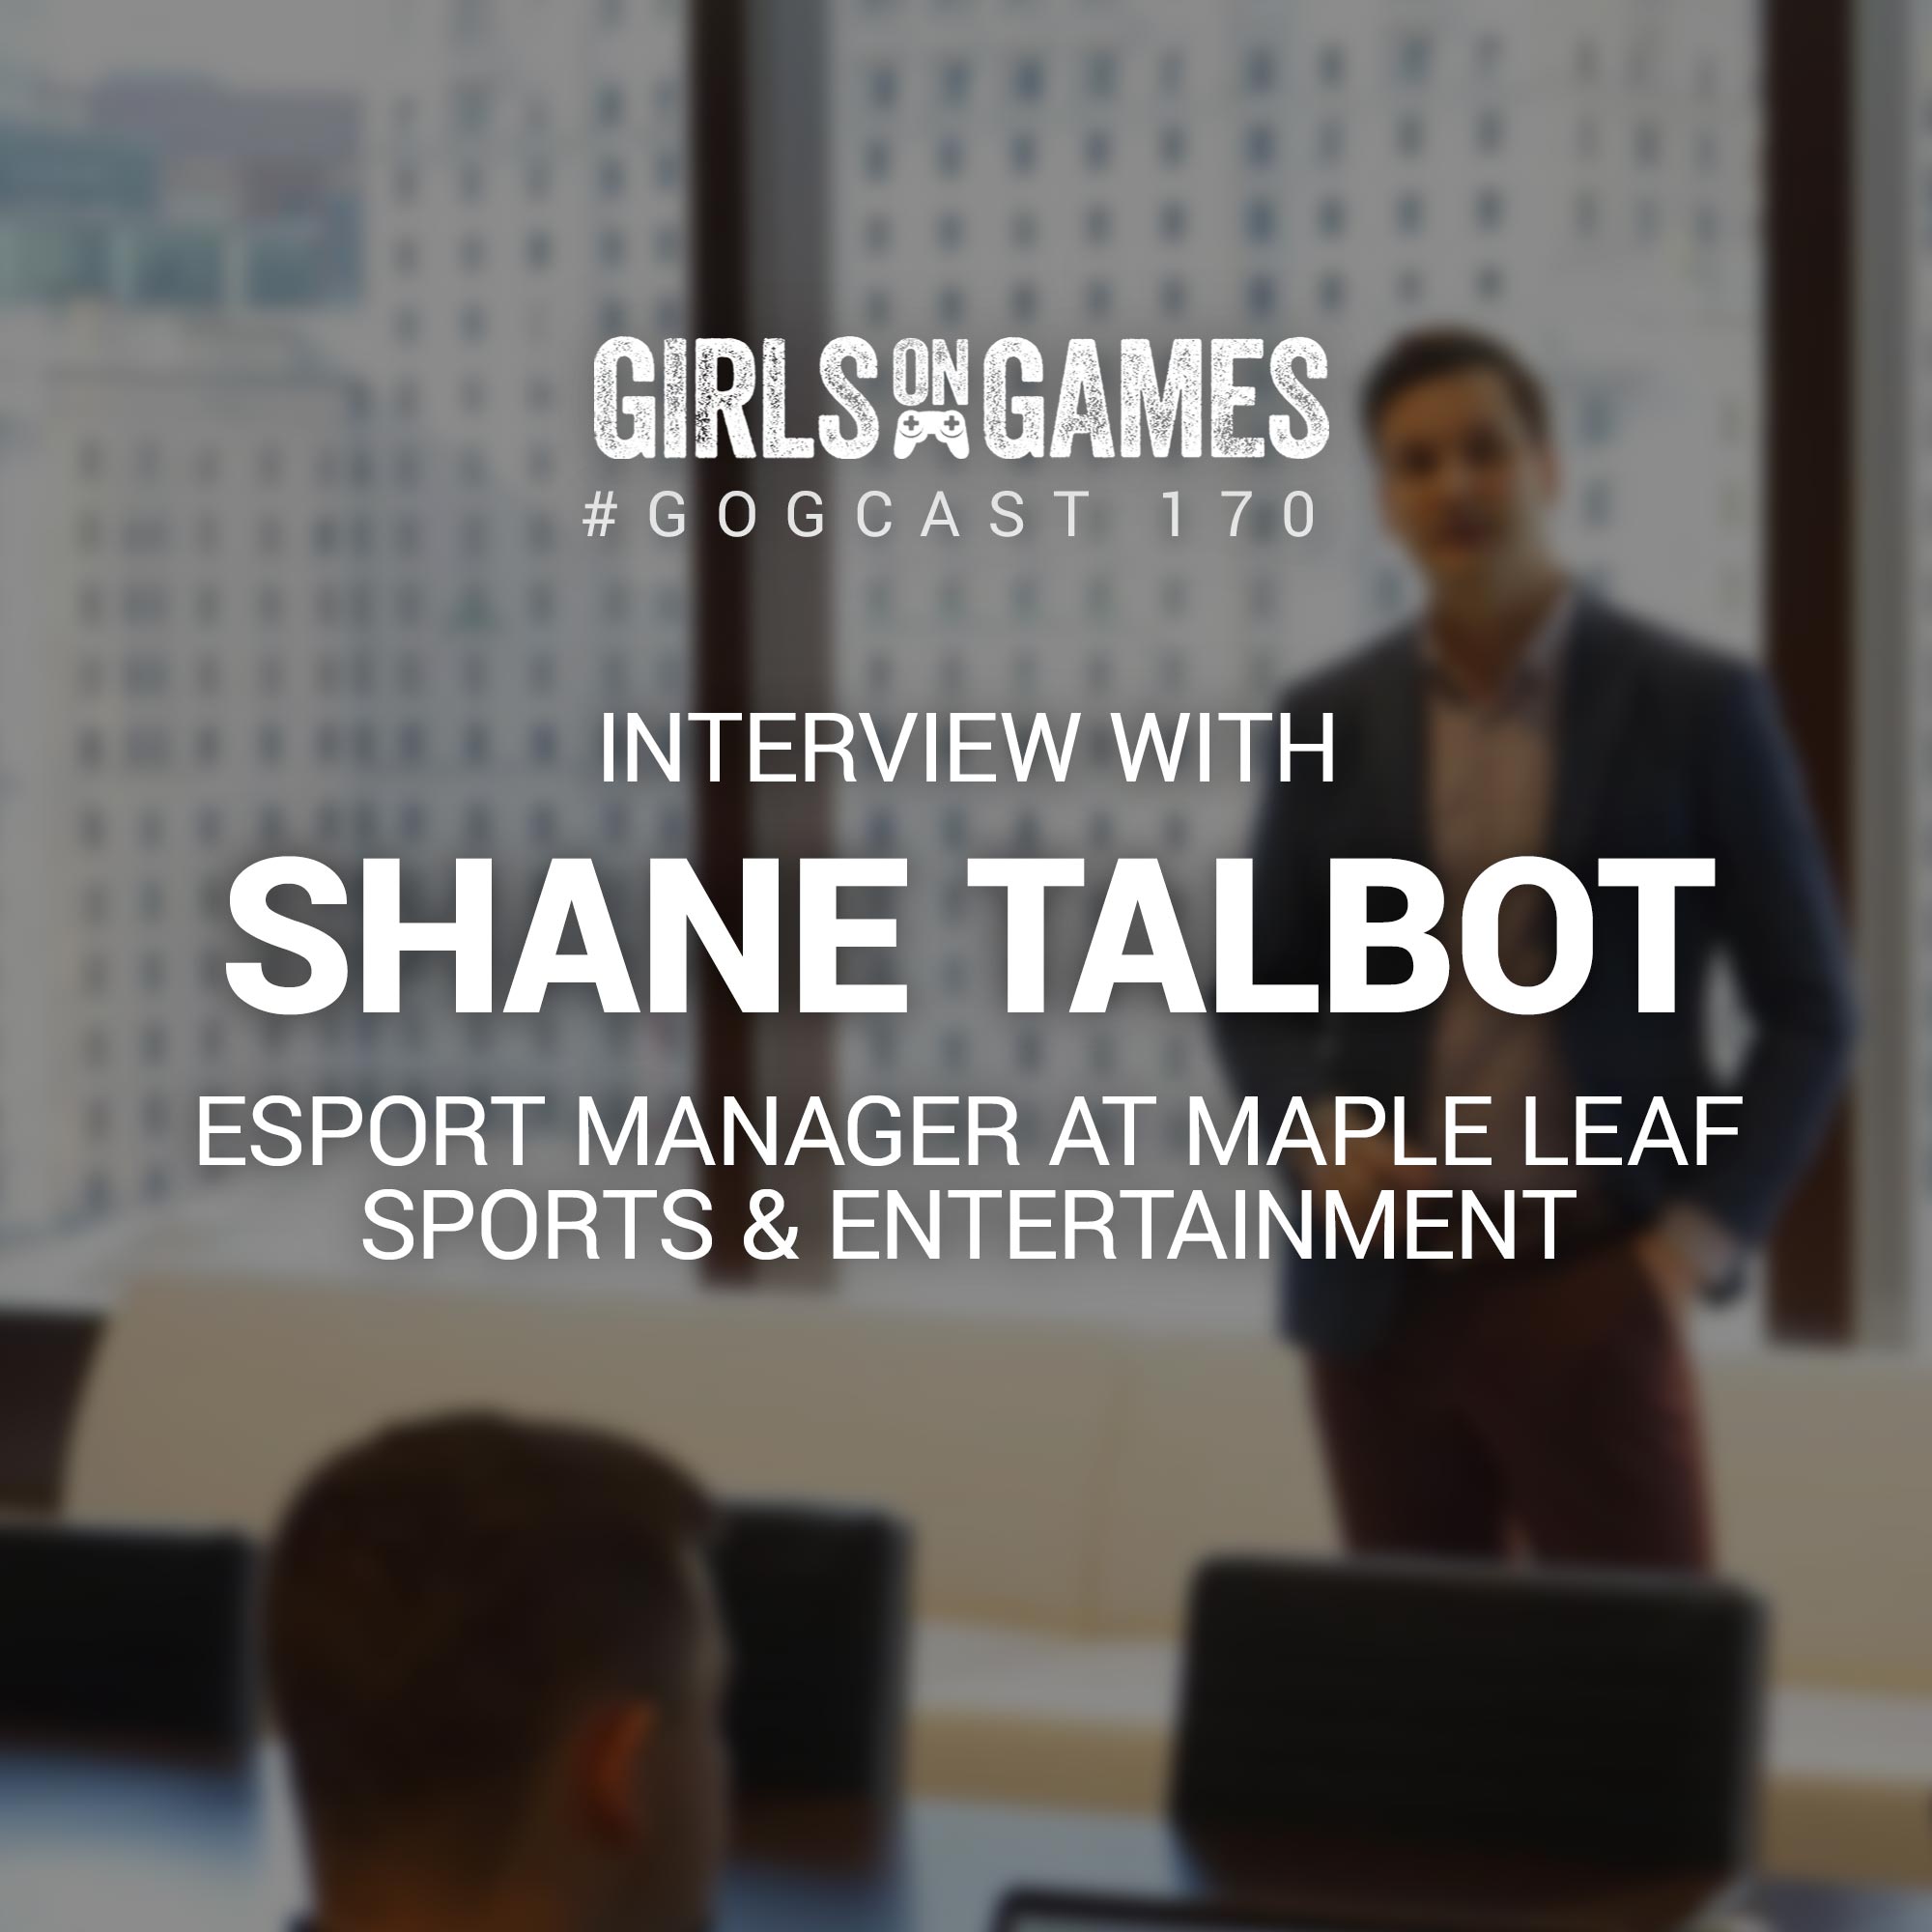 GoGCast 170: Interview with Shane Talbot, esport Manager at MLSE